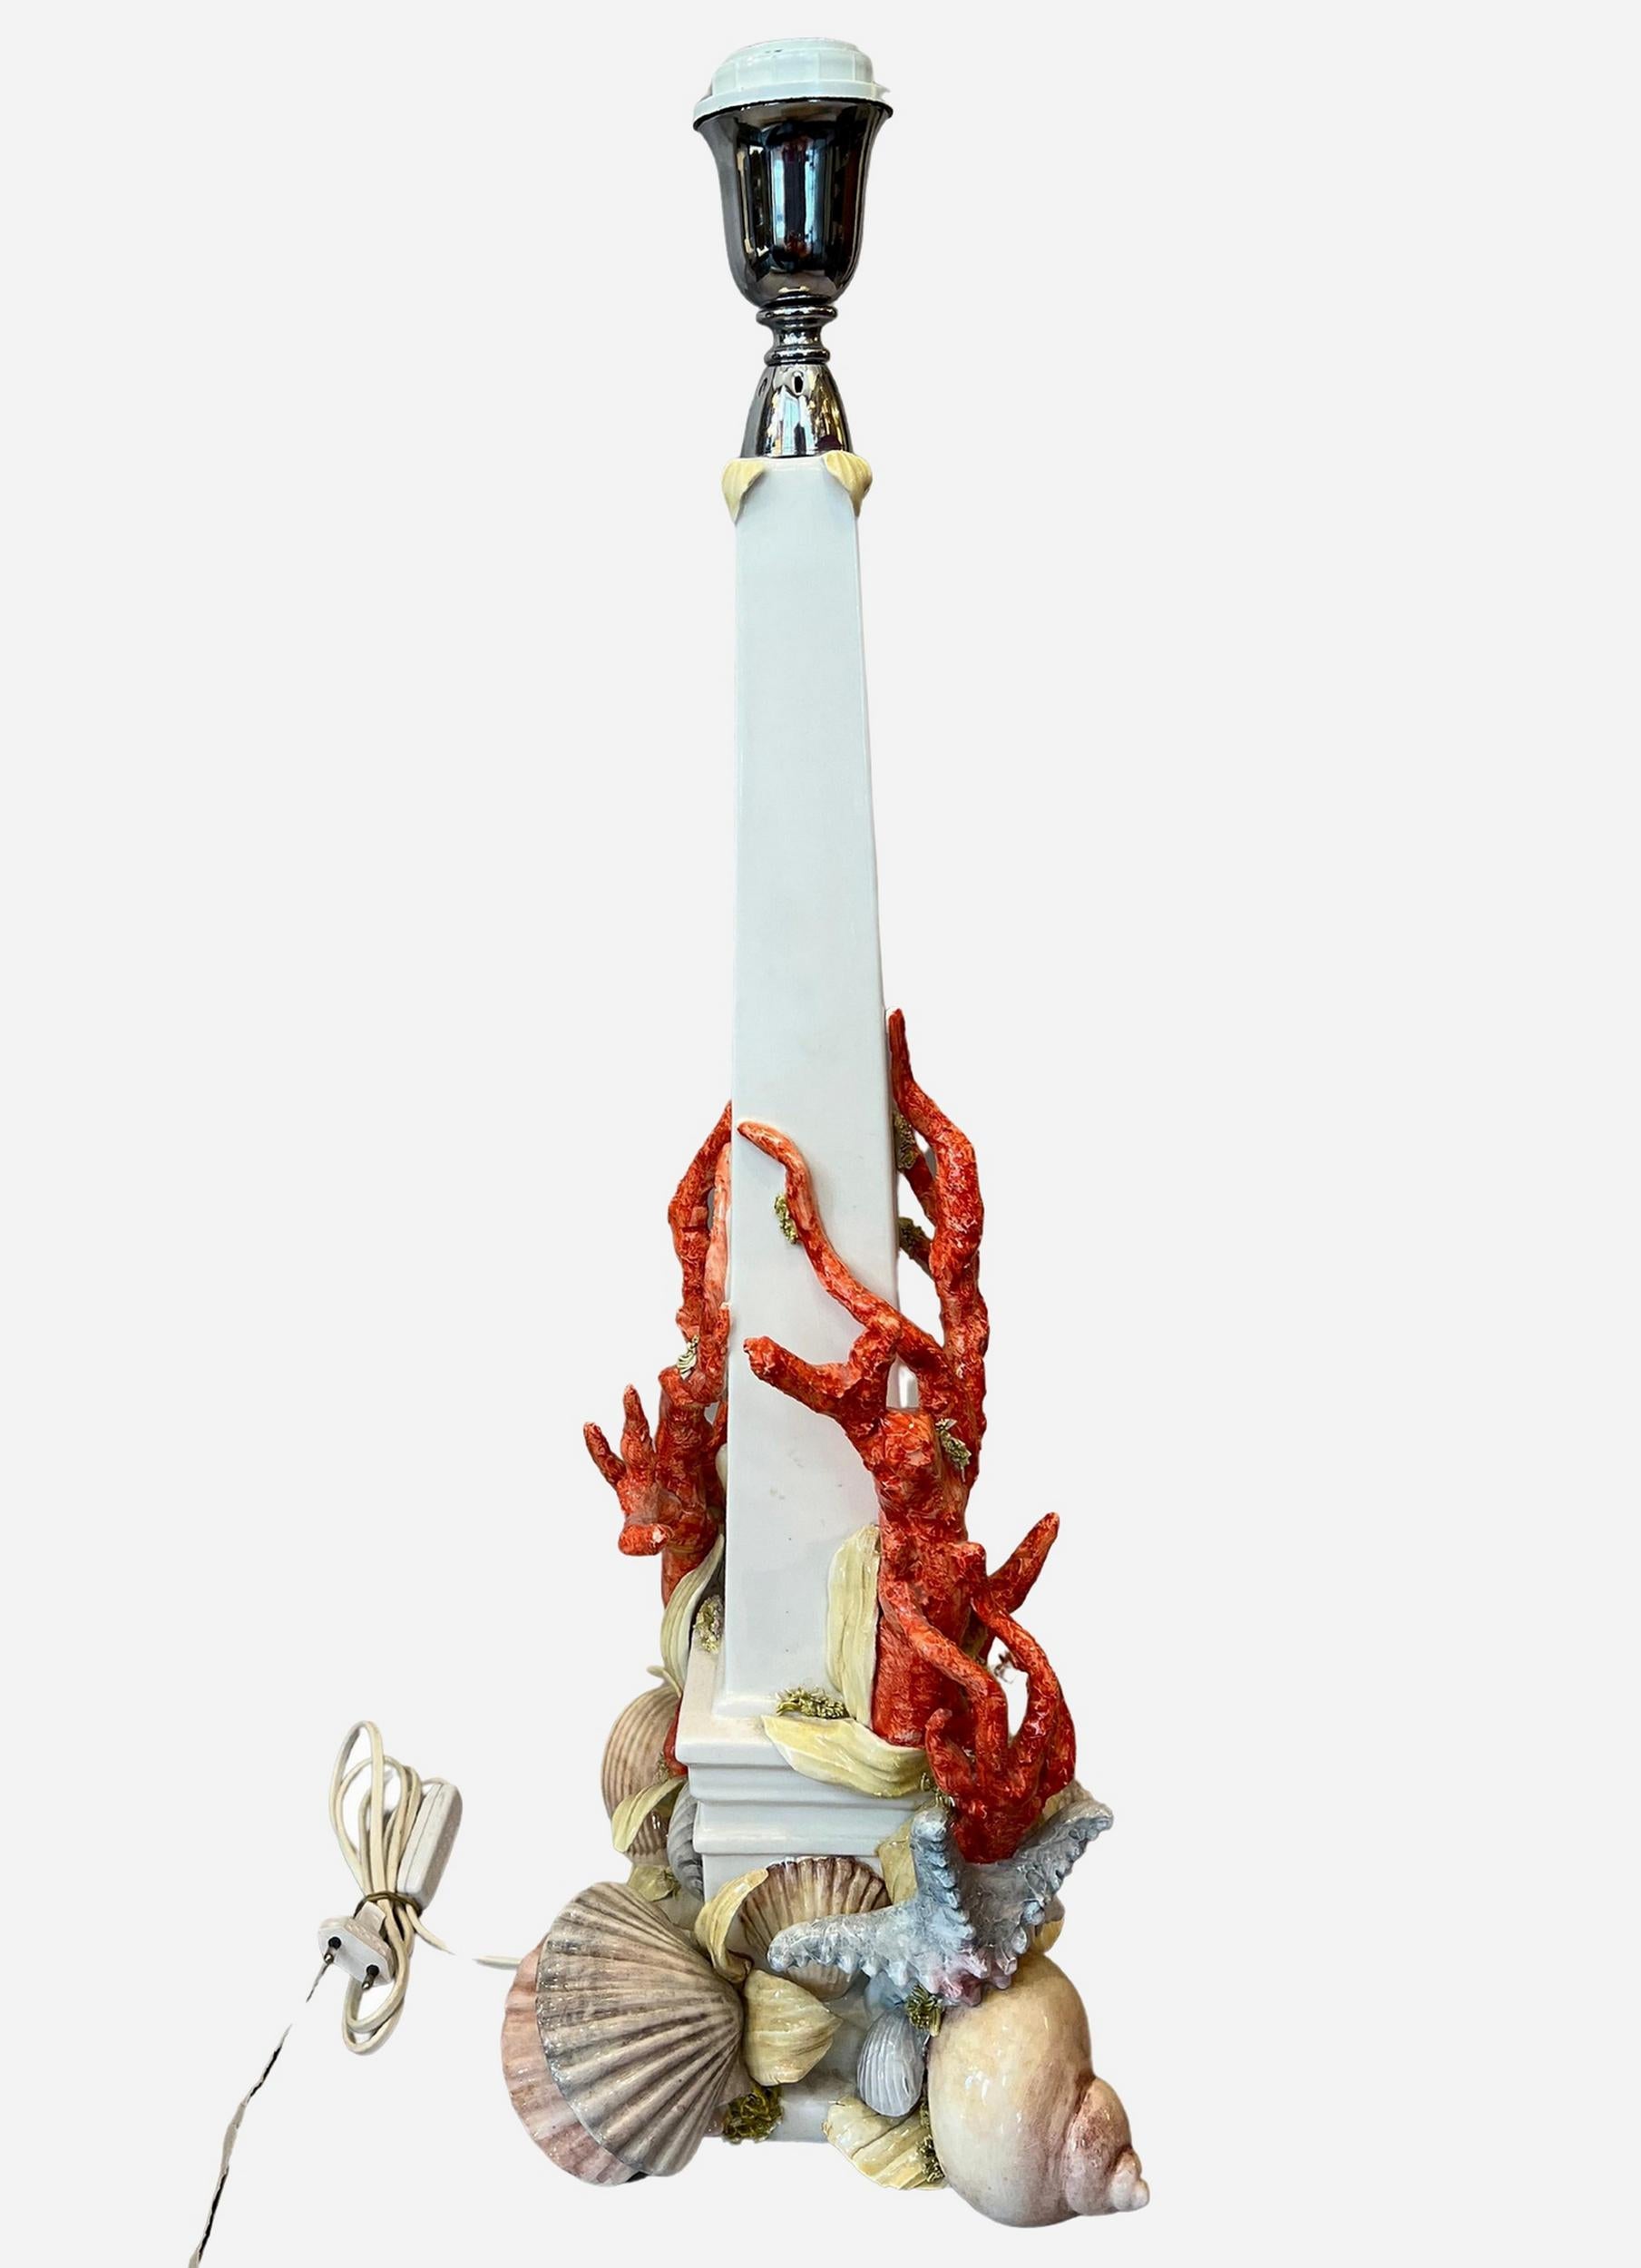 Glazed ceramic obelisk-shaped lamp base decorated with coral, seaweed, starfish and shells, by Antonio Fullin Mollica.
Heigth: 69 cm (27.2 inches)
Base: 25 x 25 cm (9.84 x 9.84 inches)
